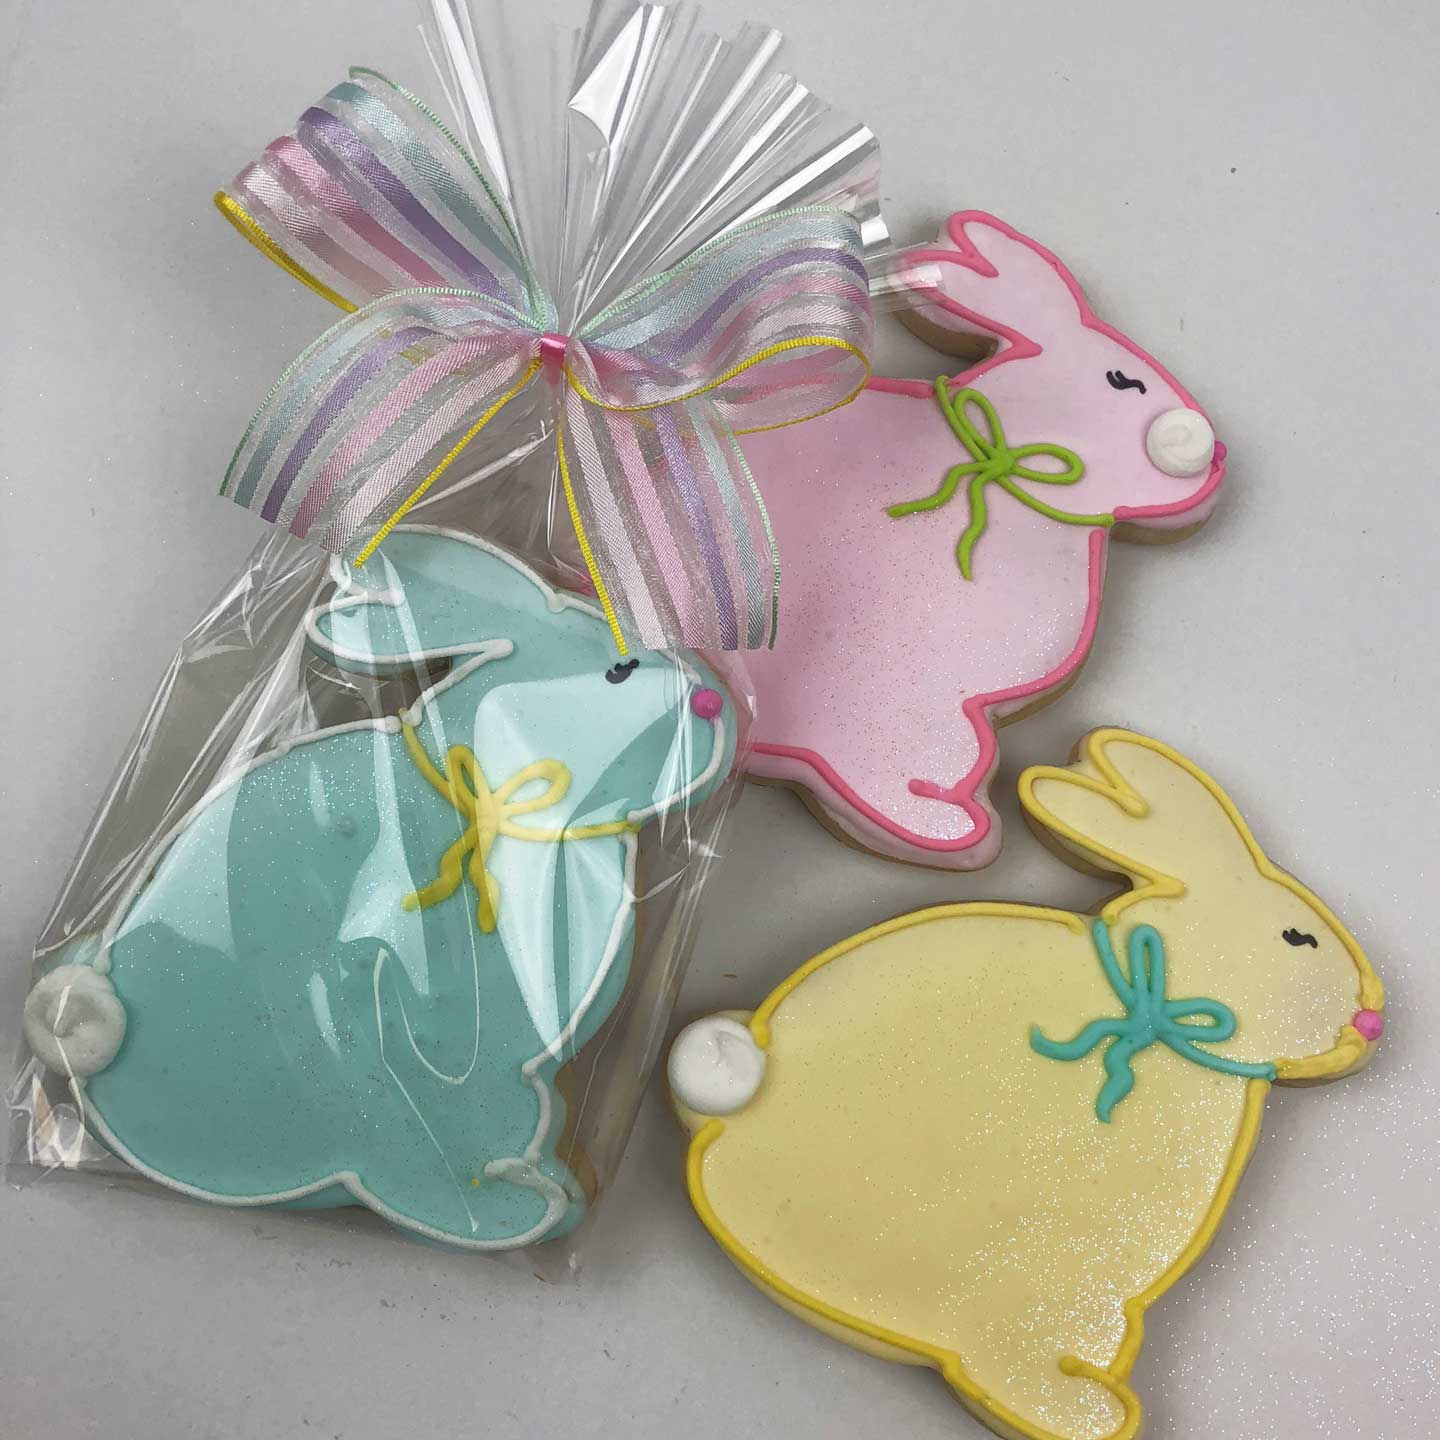 Blue, pink, and yellow Easter Bunny Cookies. The blue cookie is warped in cellophane with a ribbon